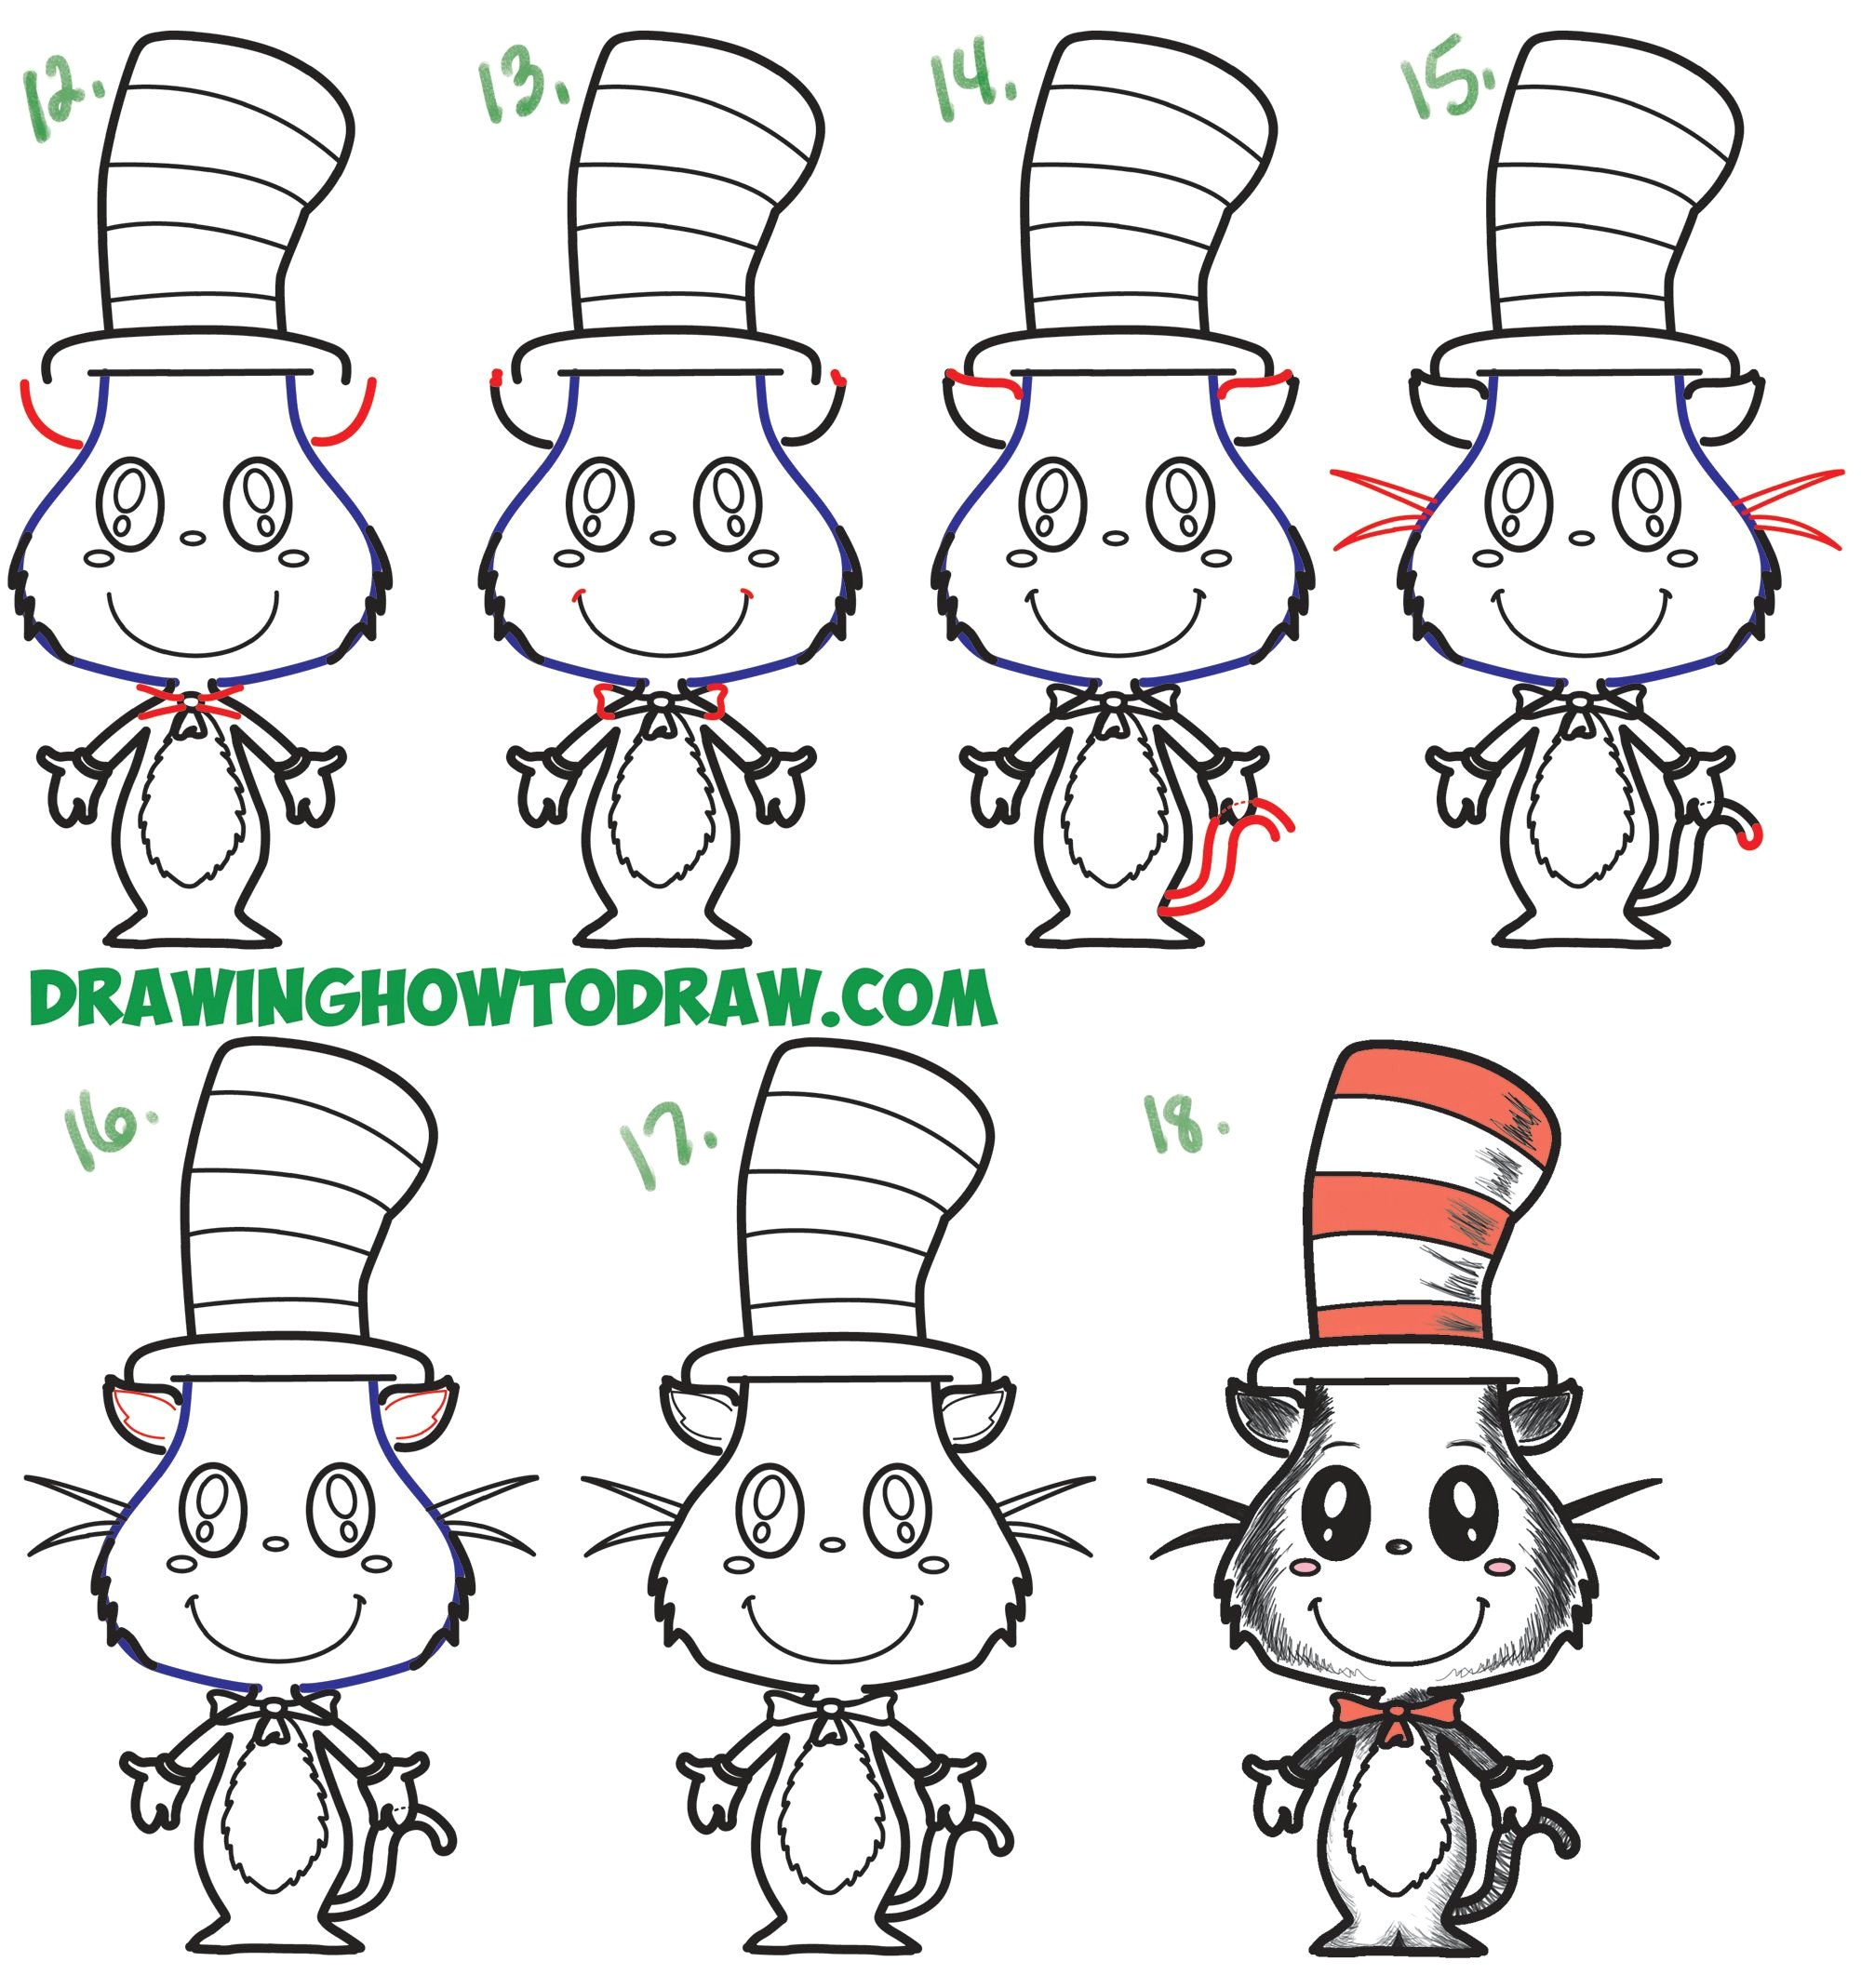 Easy Cartoon Zebra Drawing How to Draw the Cat In the Hat Cute Kawaii Chibi Version Easy